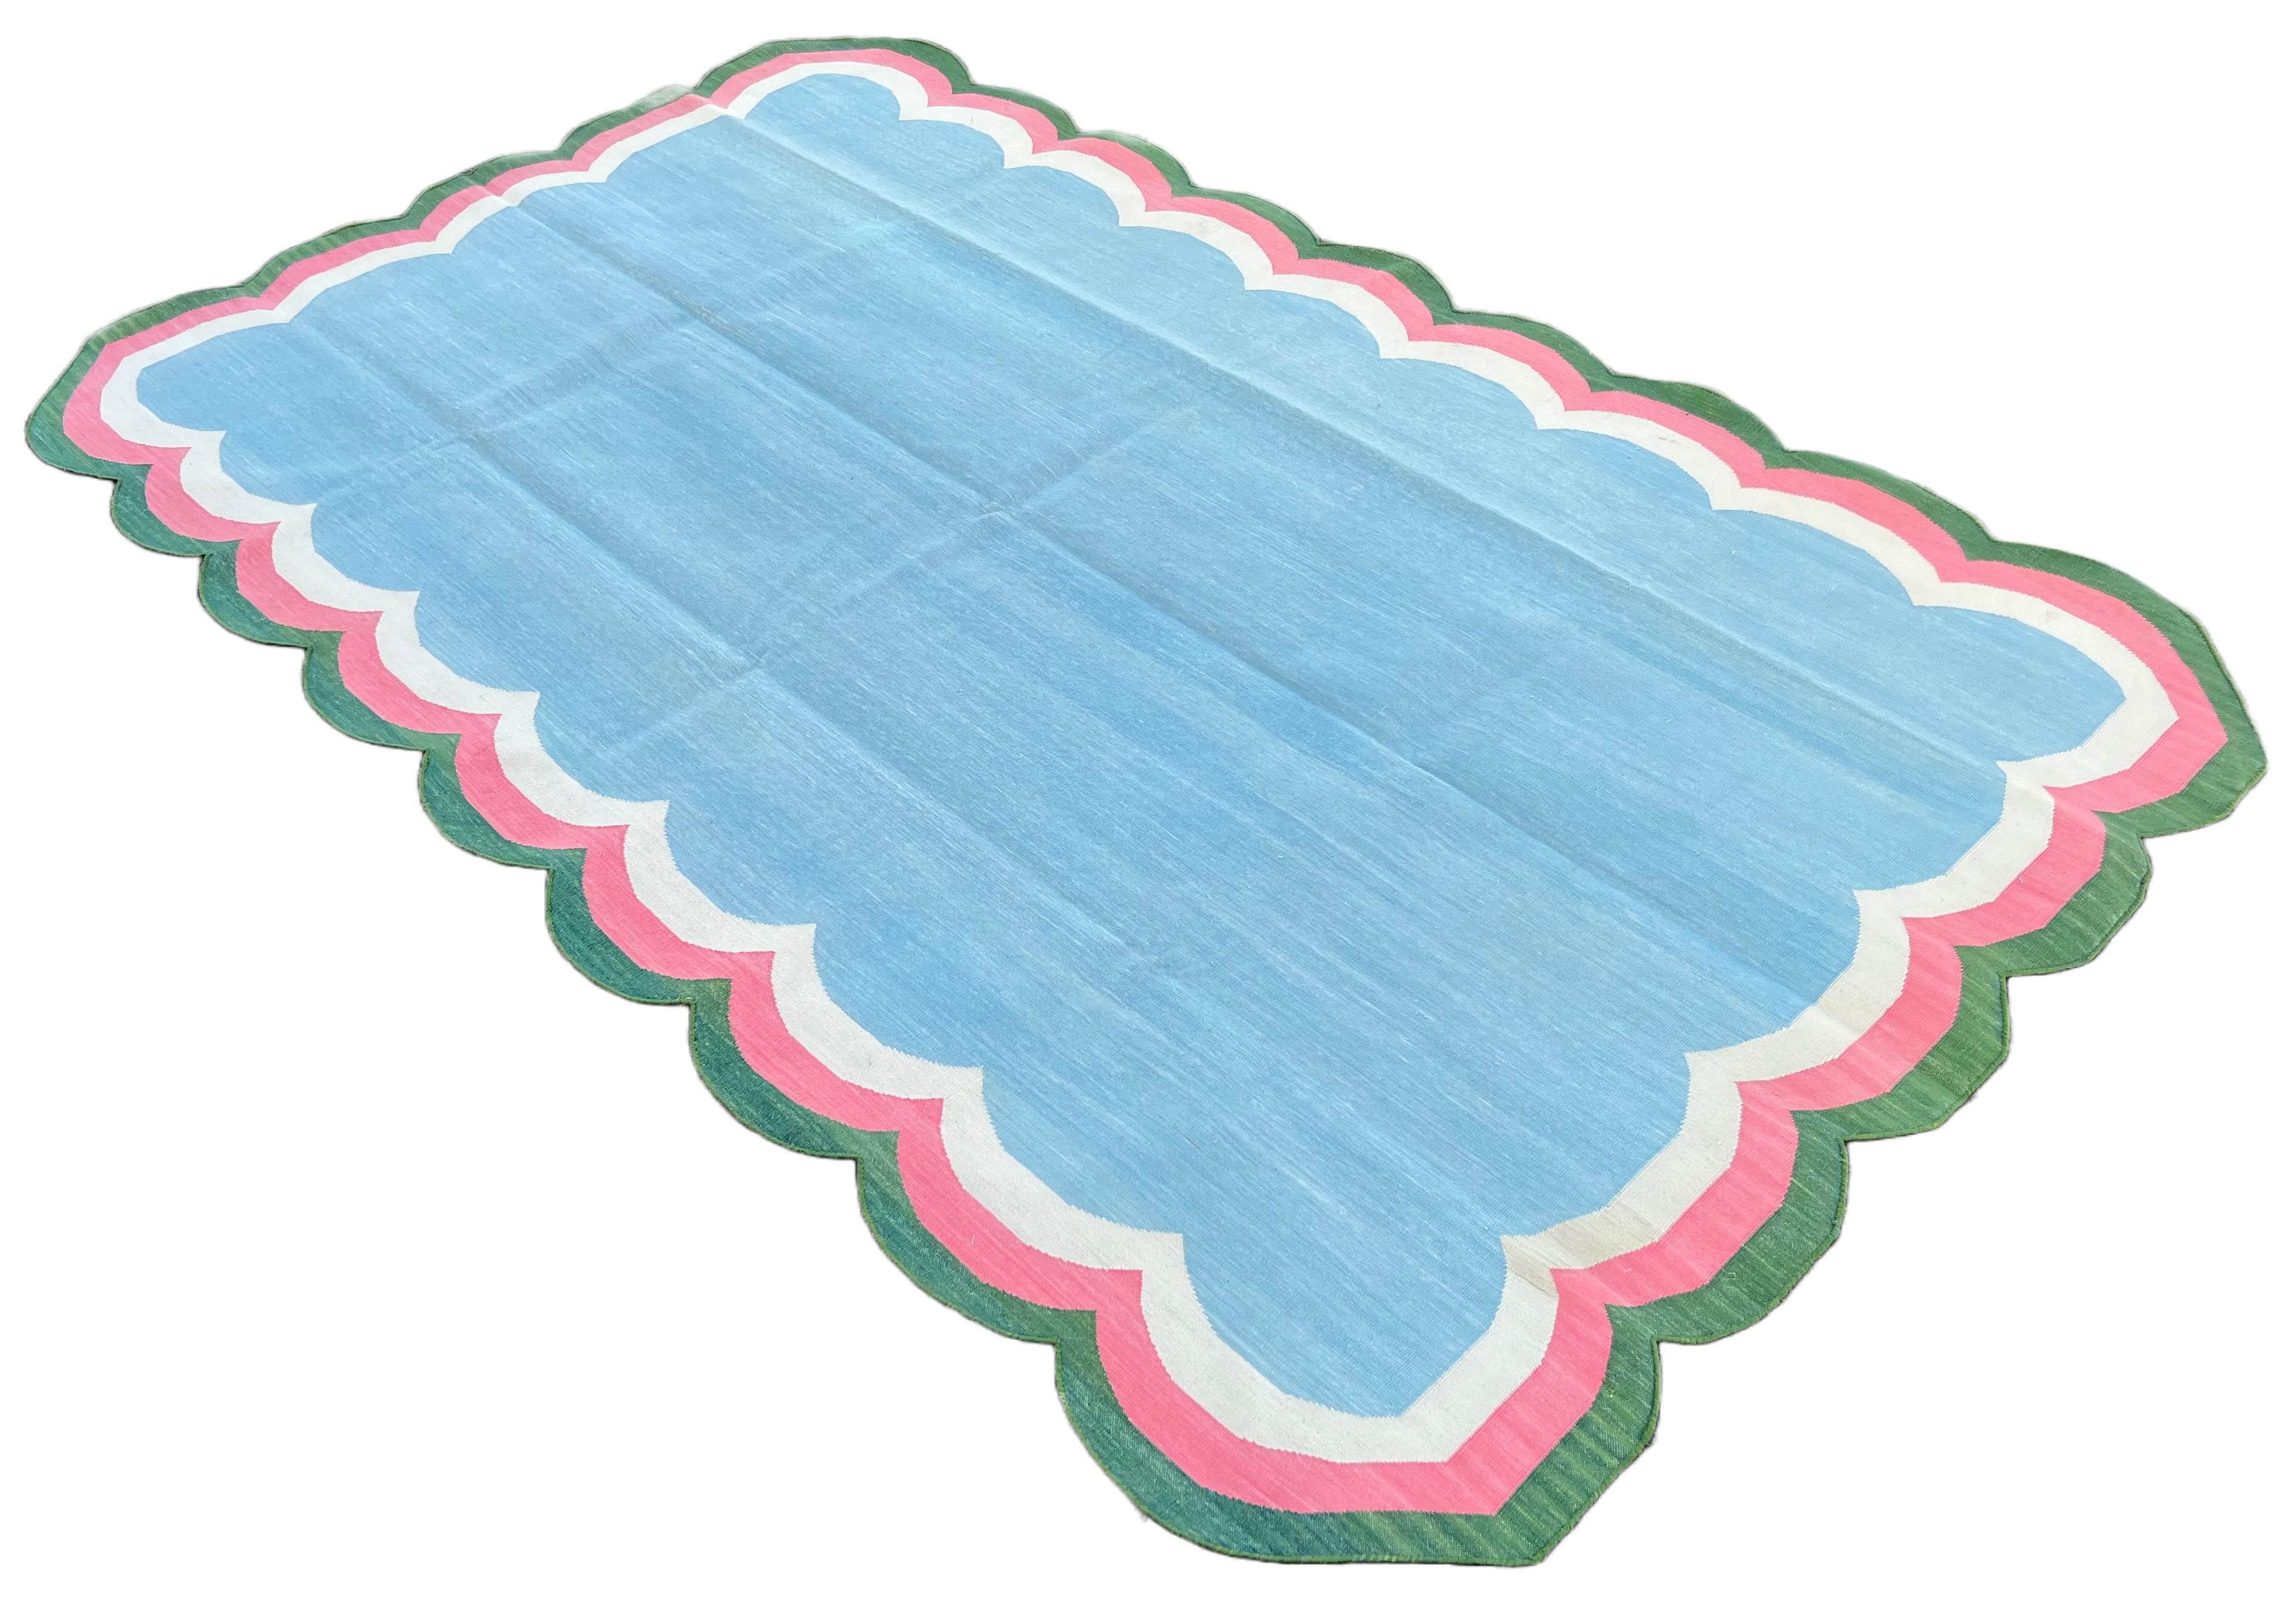 Cotton Vegetable Dyed Reversible Sky Blue, White, Pink And Green Four Sided Scalloped Indian Rug - 5'x8'
These special flat-weave dhurries are hand-woven with 15 ply 100% cotton yarn. Due to the special manufacturing techniques used to create our